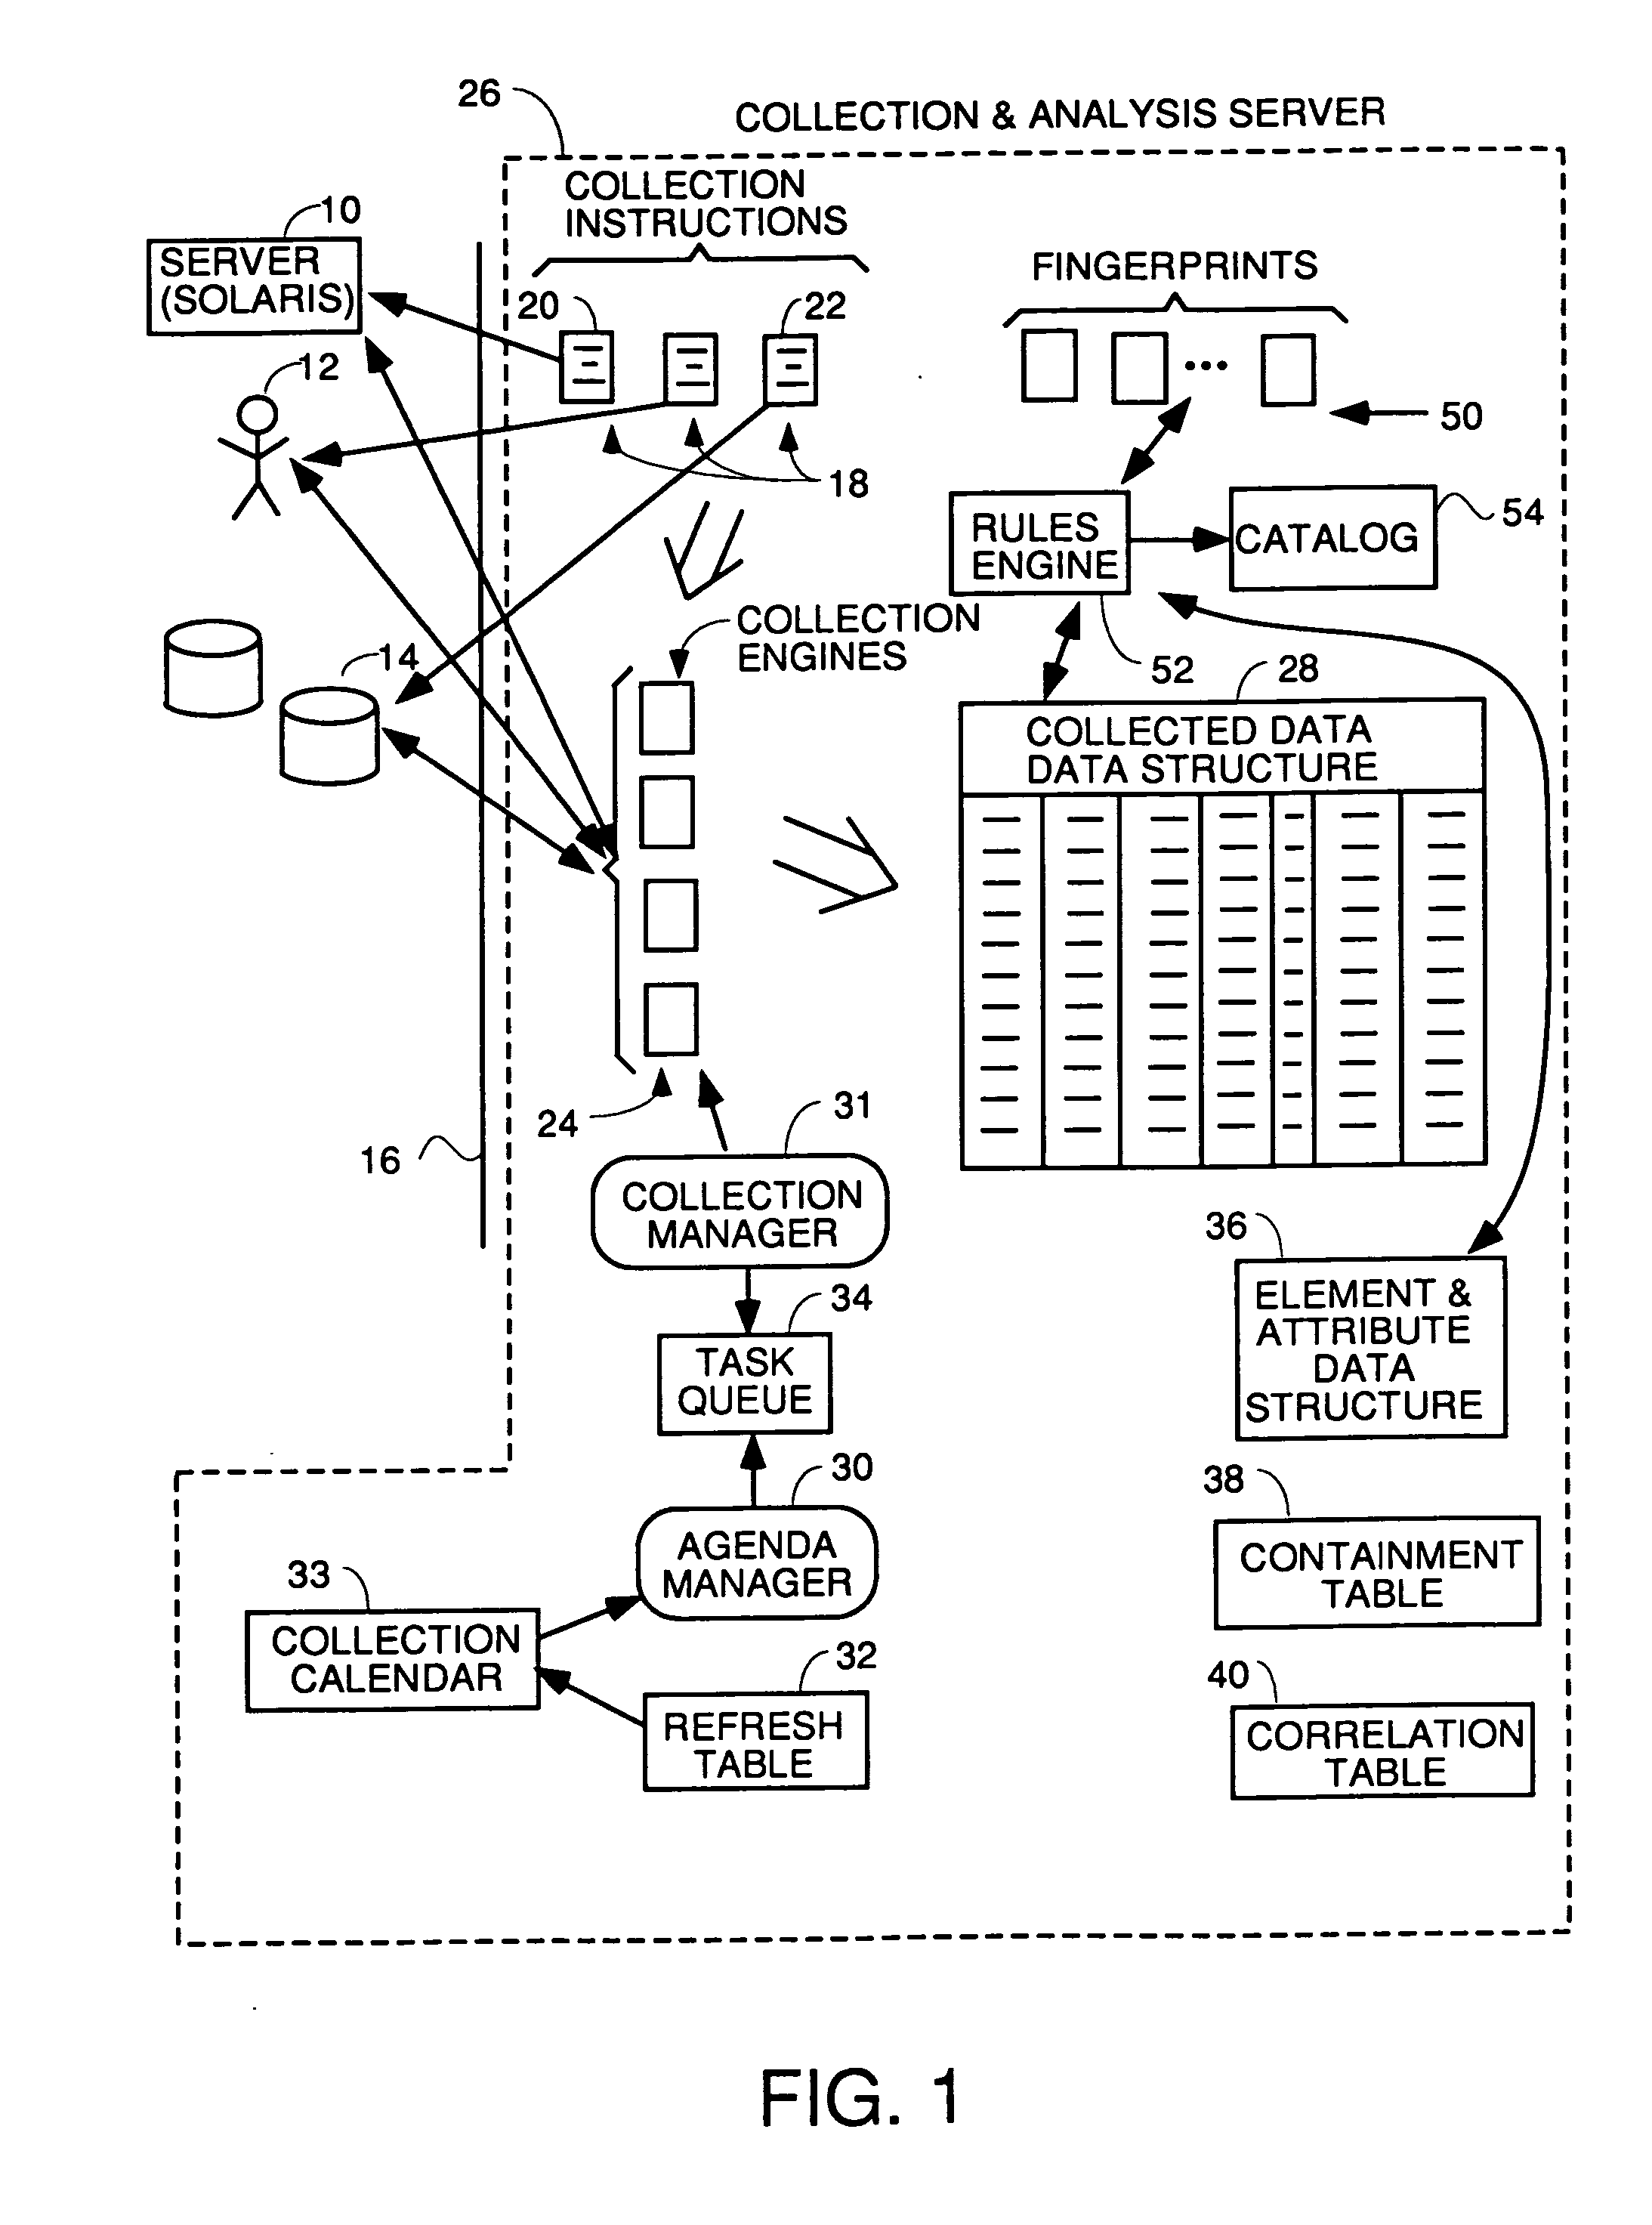 Apparatus and method to automatically collect data regarding assets of a business entity